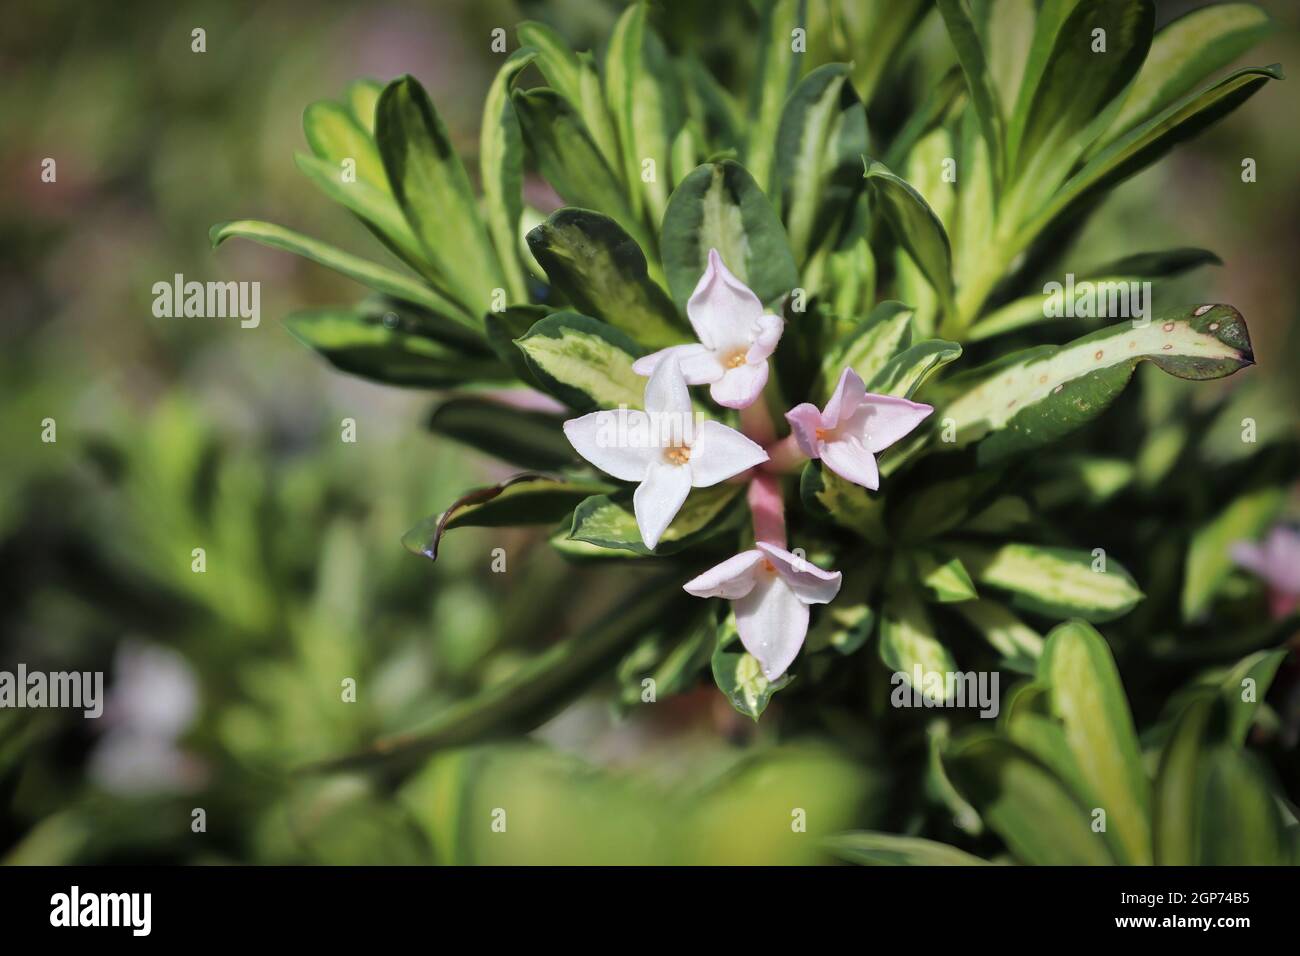 Closeup of variegated leaves on a daphne shrub. Stock Photo